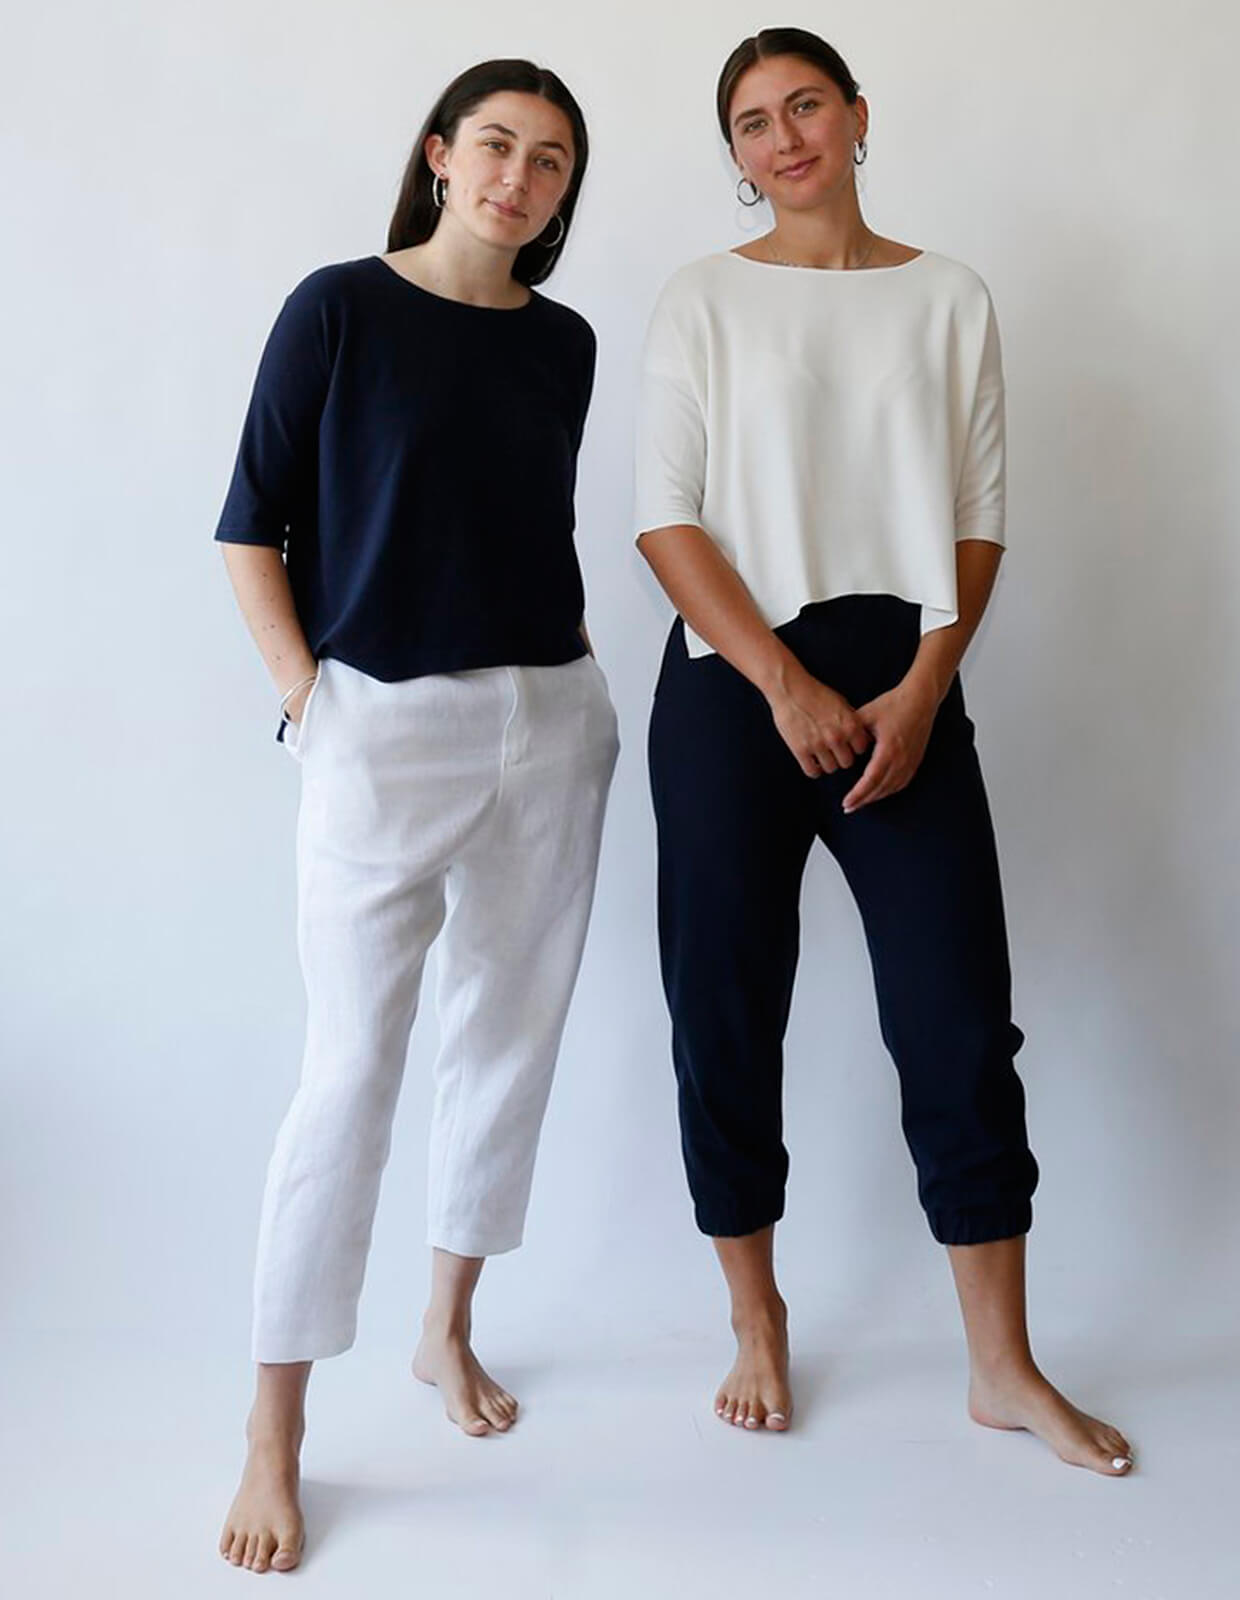 Women wearing the Lounge Pant sewing pattern from The Maker's Atelier on The Fold Line. A trouser pattern made in cotton drill, linen, denim and other mid-weight woven fabrics, featuring a looser fit, lower crotch, cropped length, back patch pockets, fly 